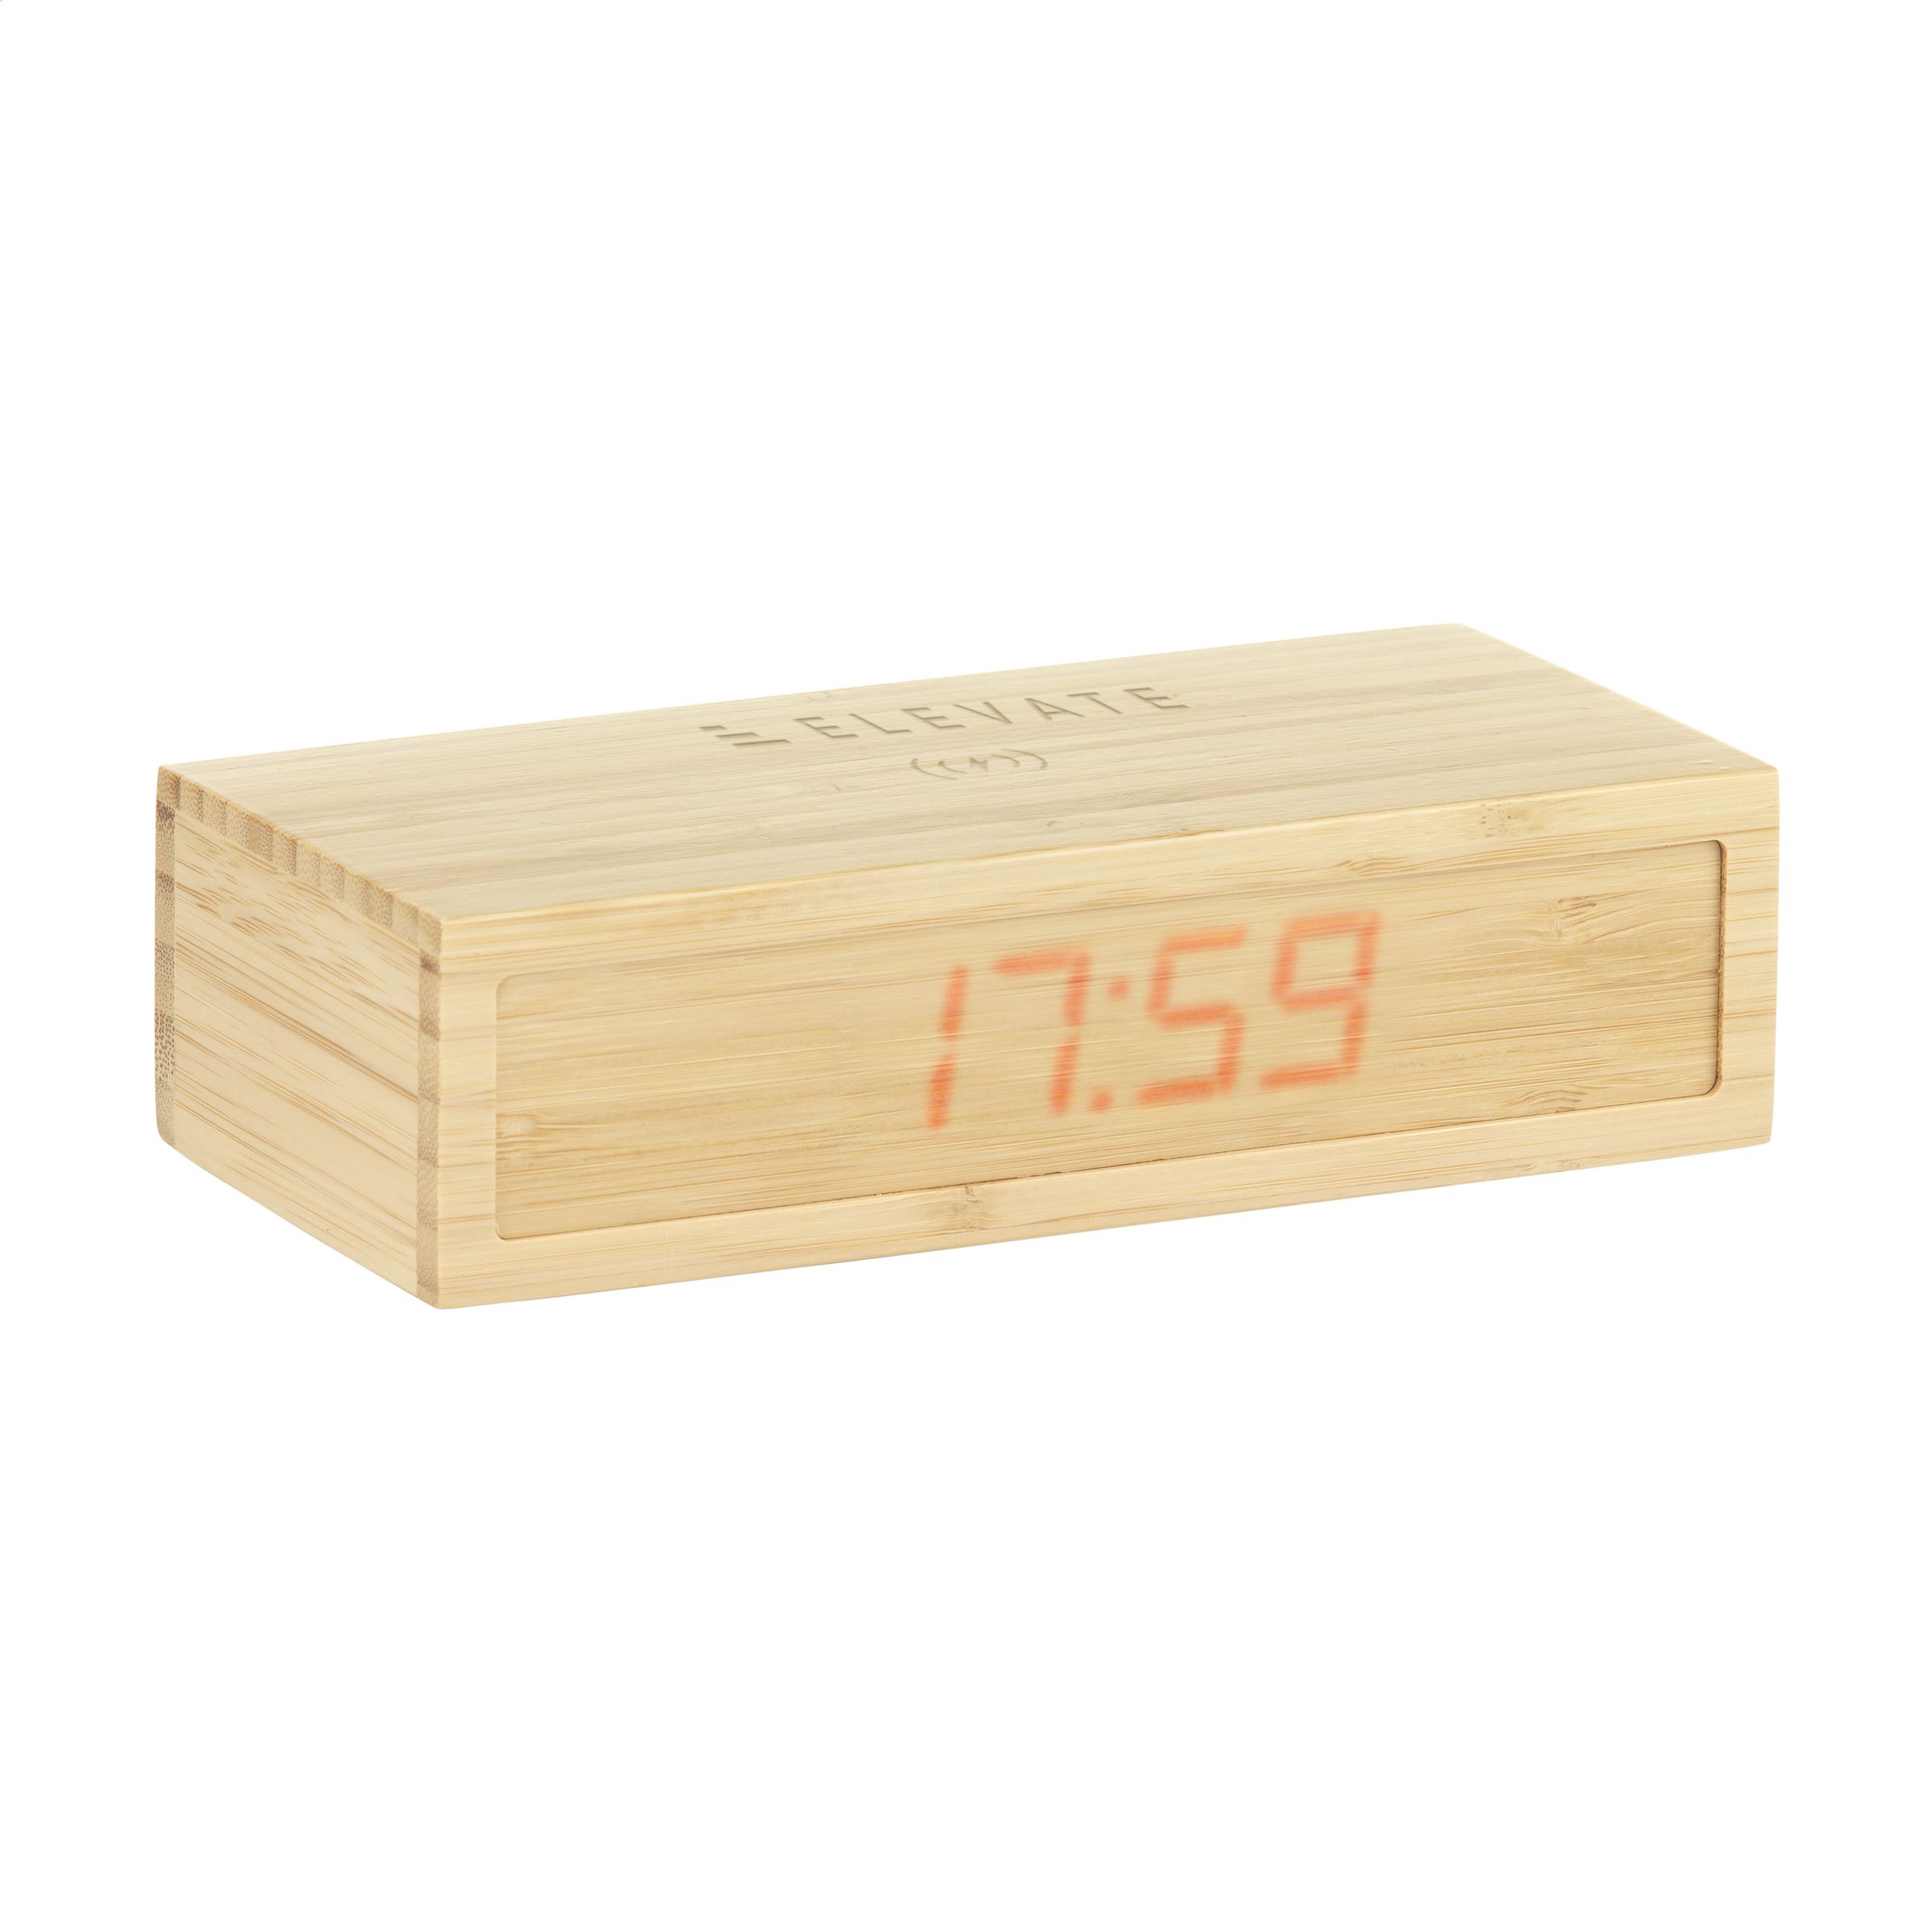 10W Wireless Charger and Alarm Clock with Bamboo Casing - Upavon - Soham